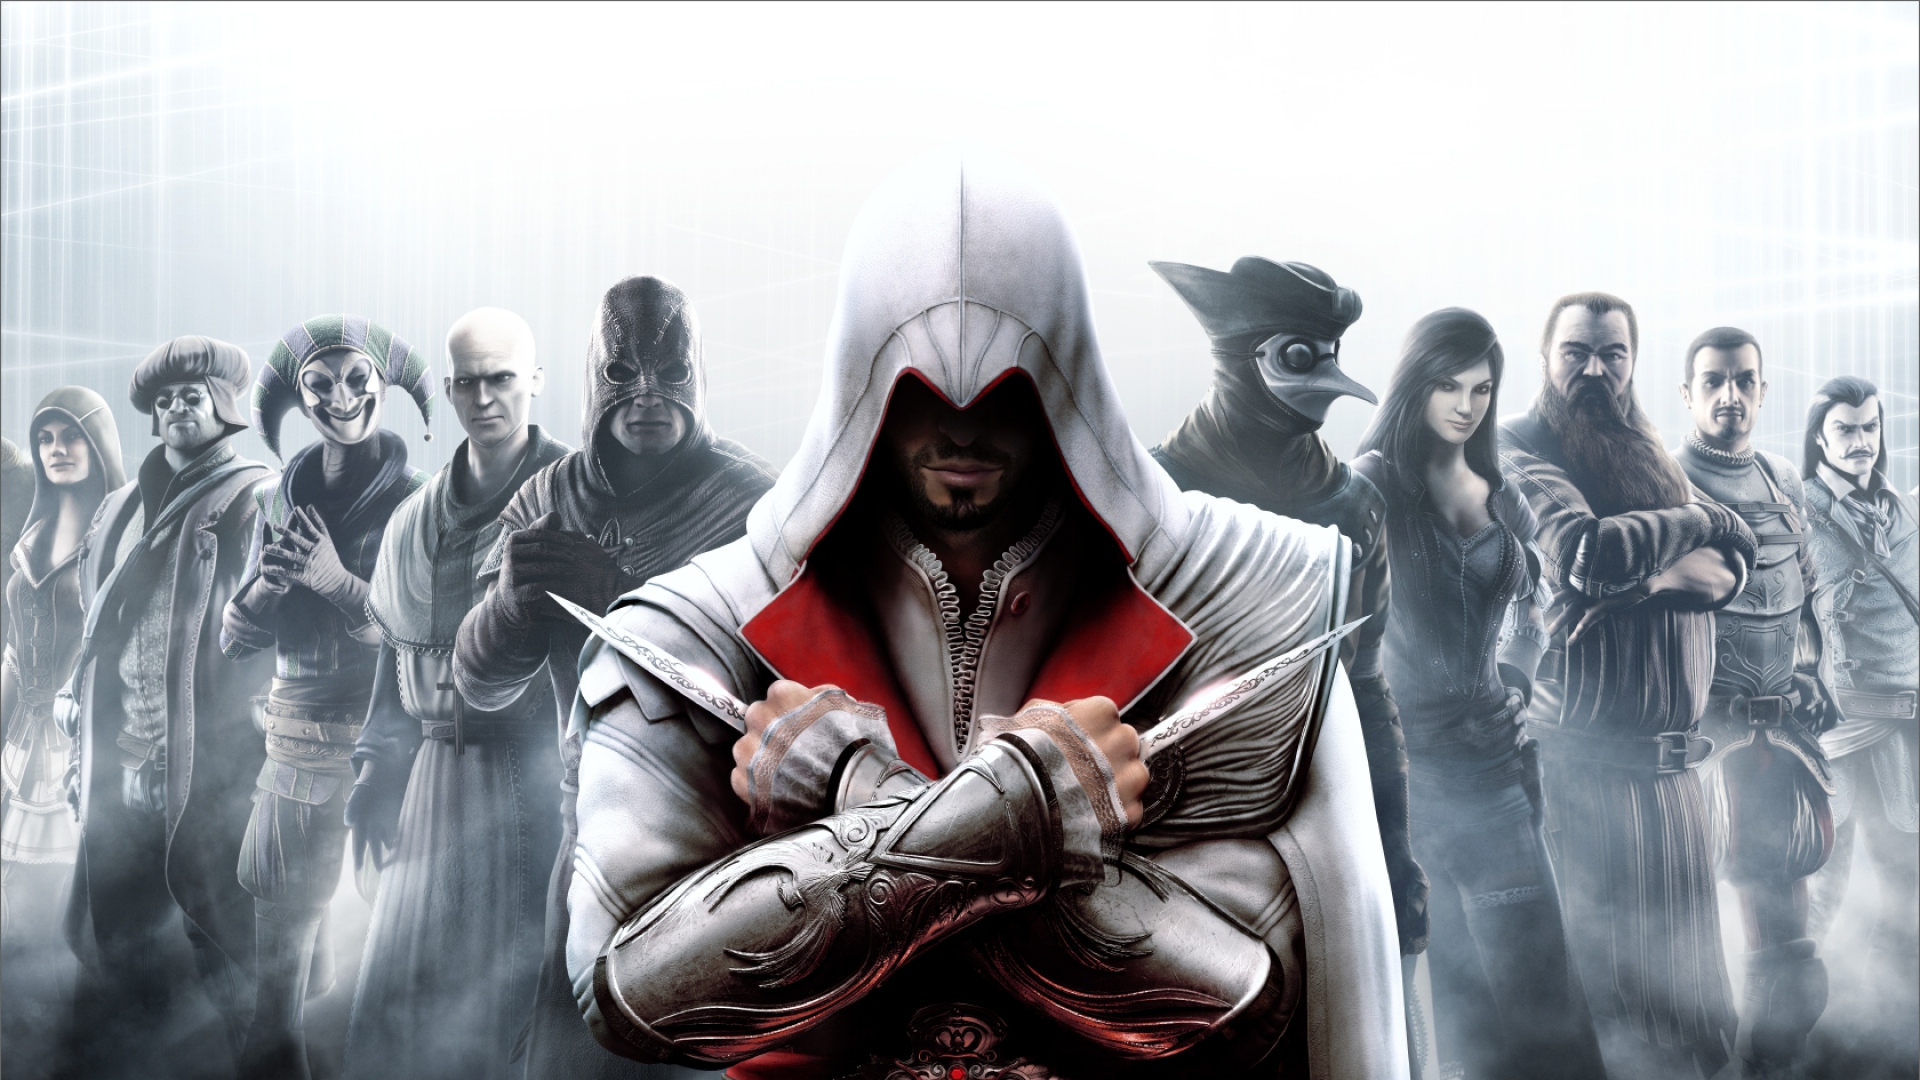 Assassin's Creed: Brotherhood HD Wallpaper and Background